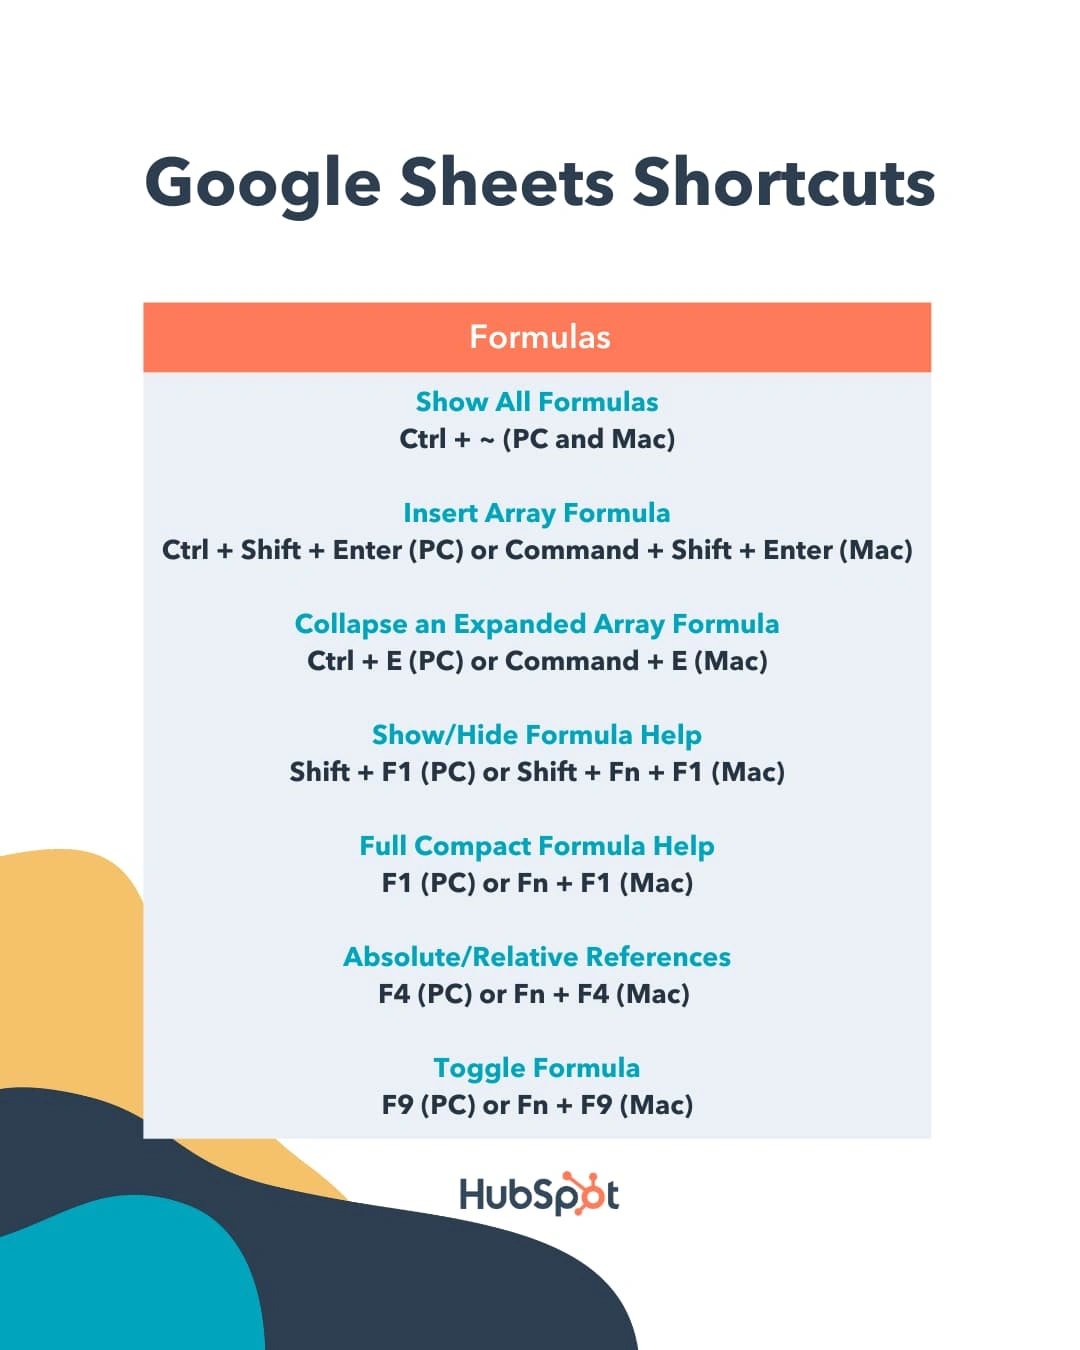 Using Google Sheets shortcuts to show all formulas, insert array formula, and more